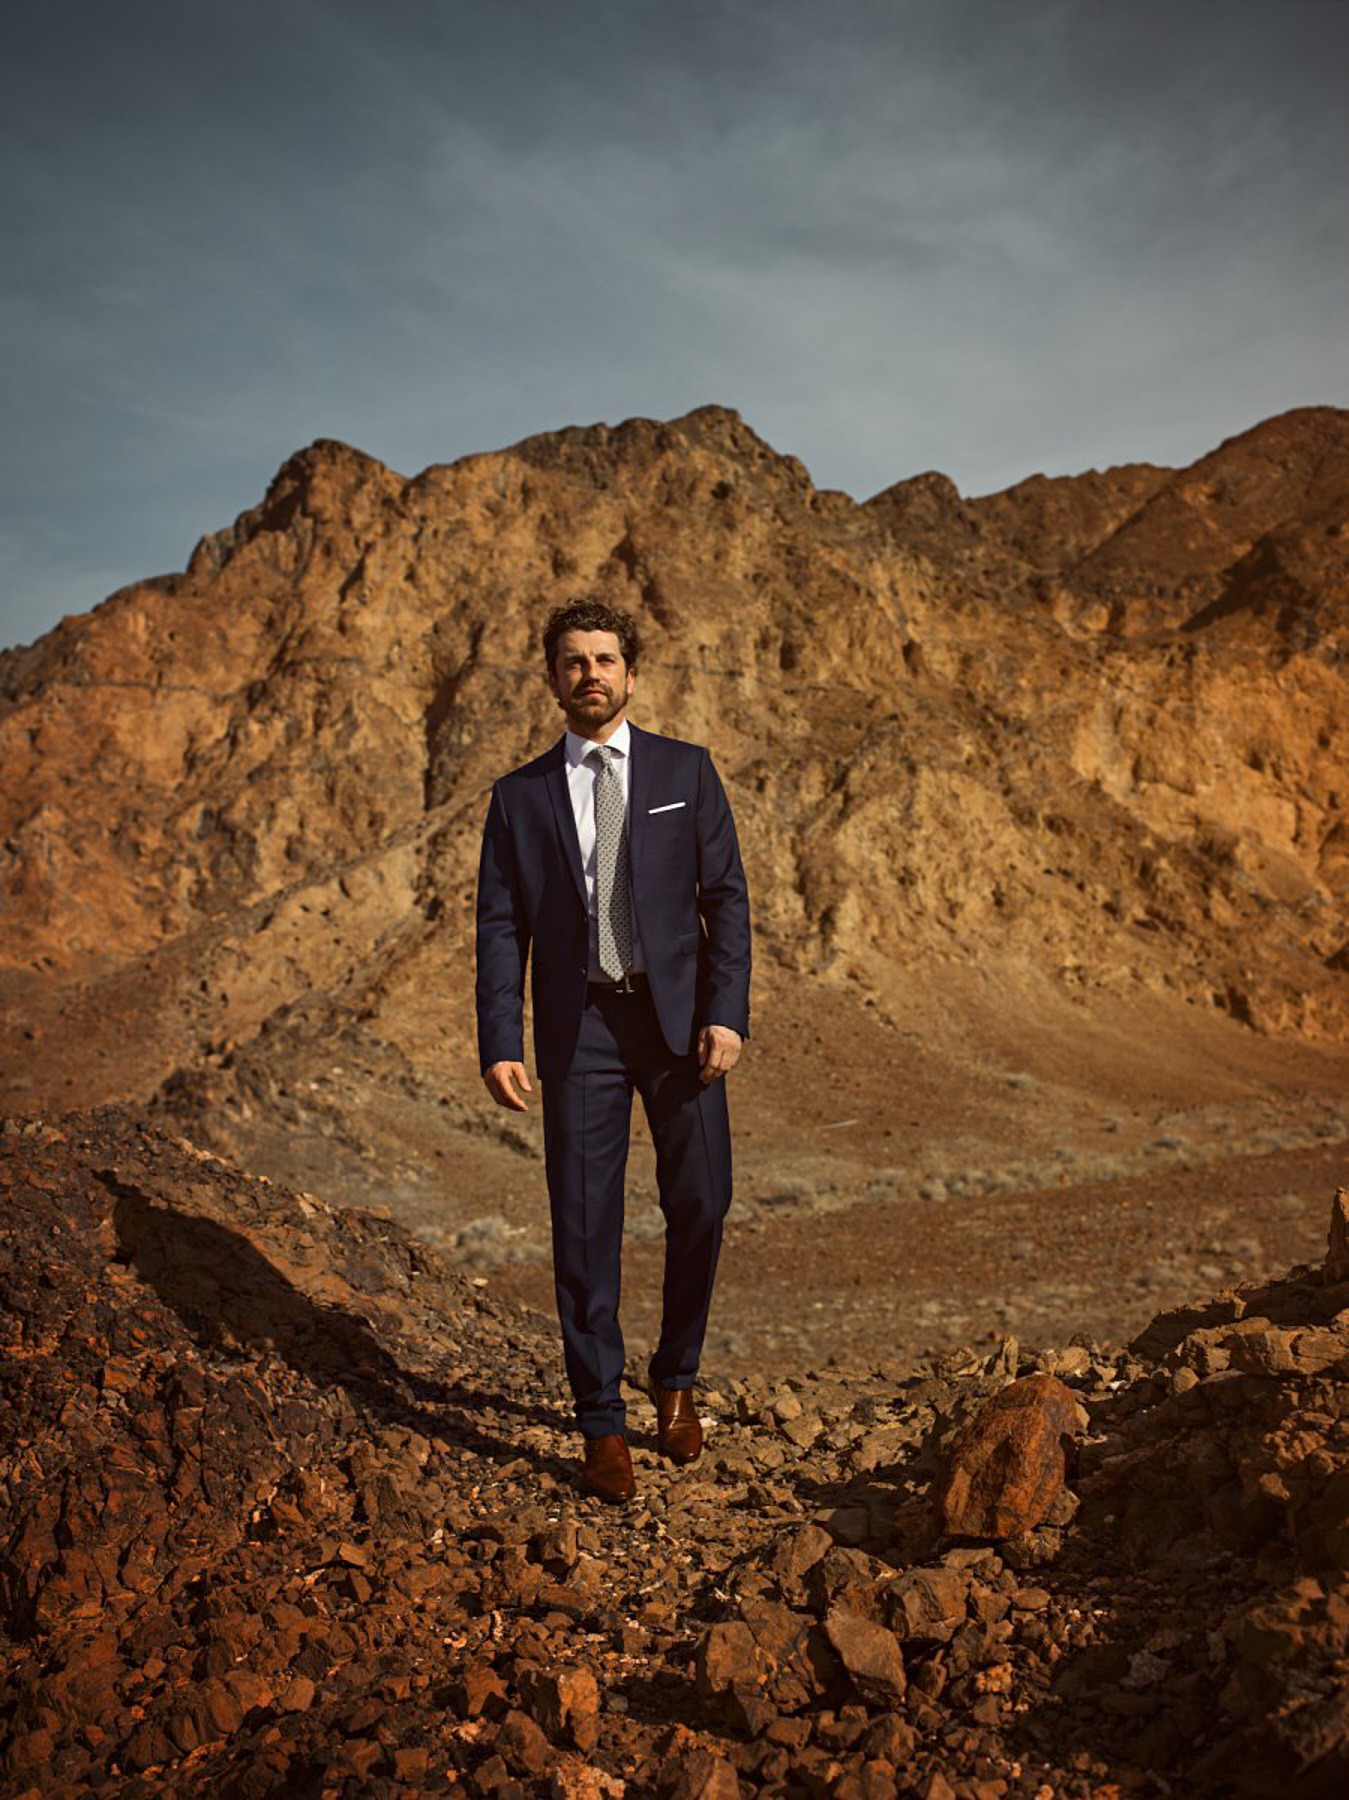 köhler campaign oman (10 images) by Mike Meyer Photography